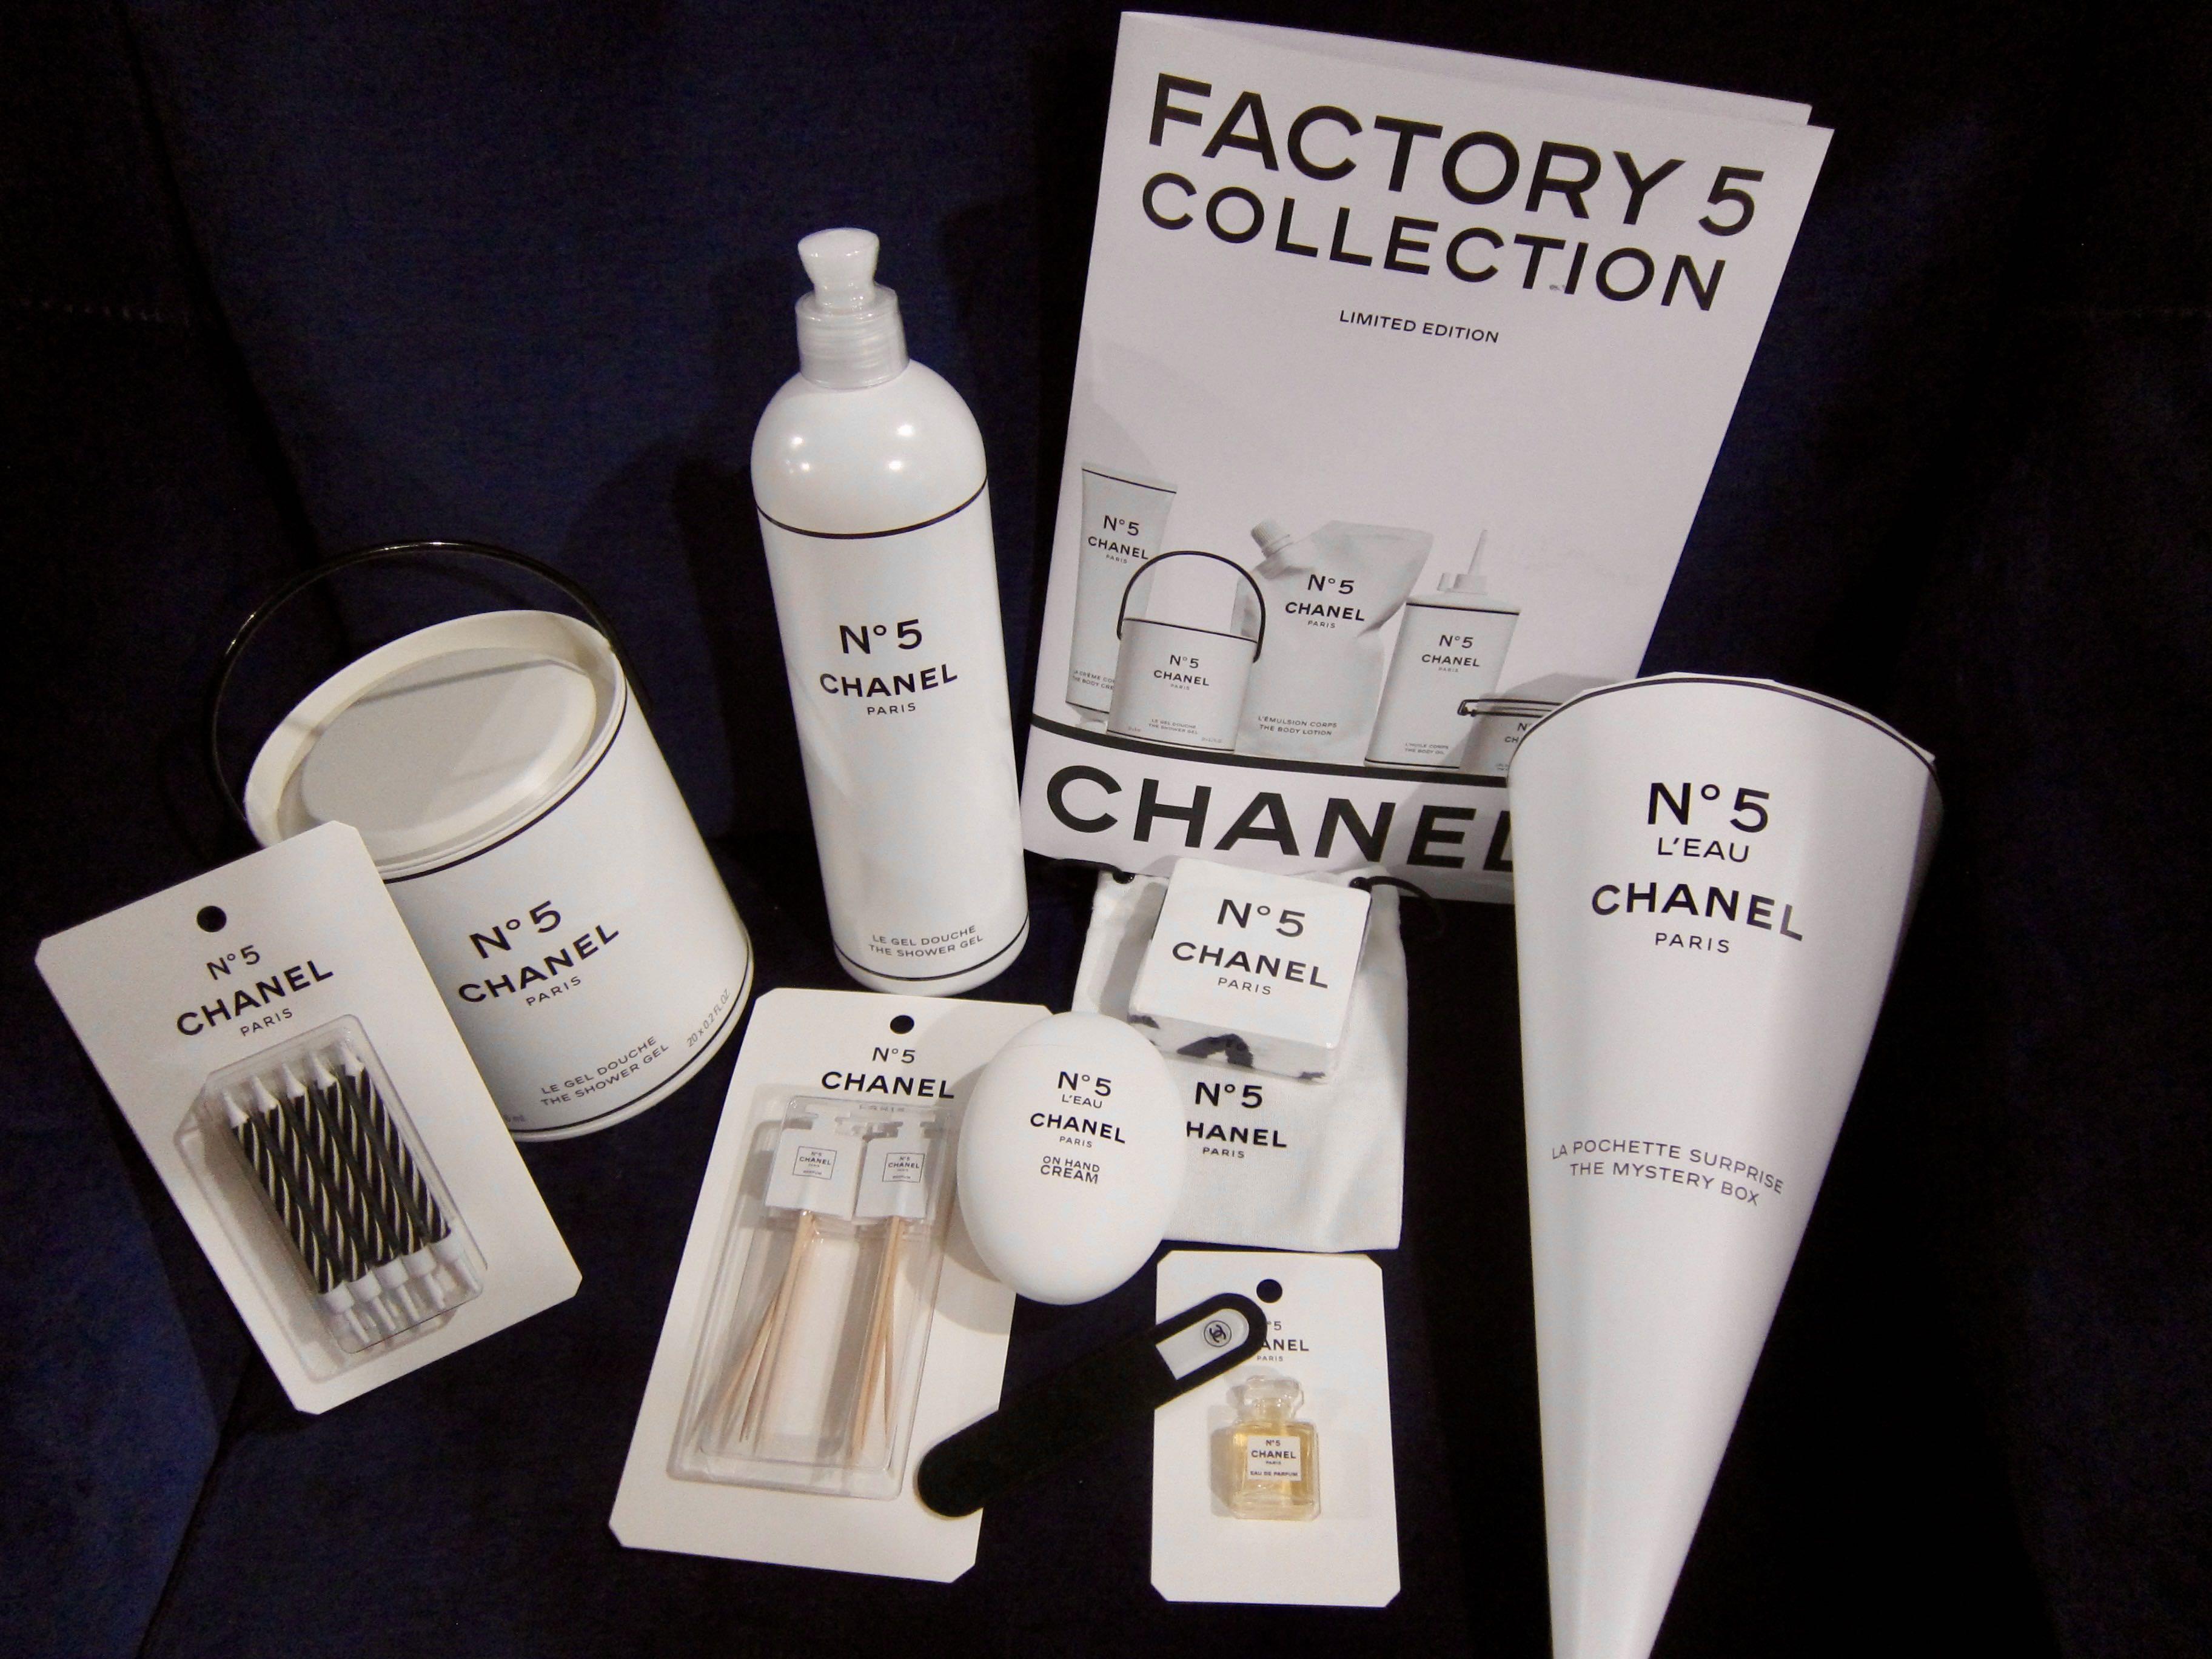 Chanel No 5 Glass Water Bottle Factory Collection Limited Edition Bnwt